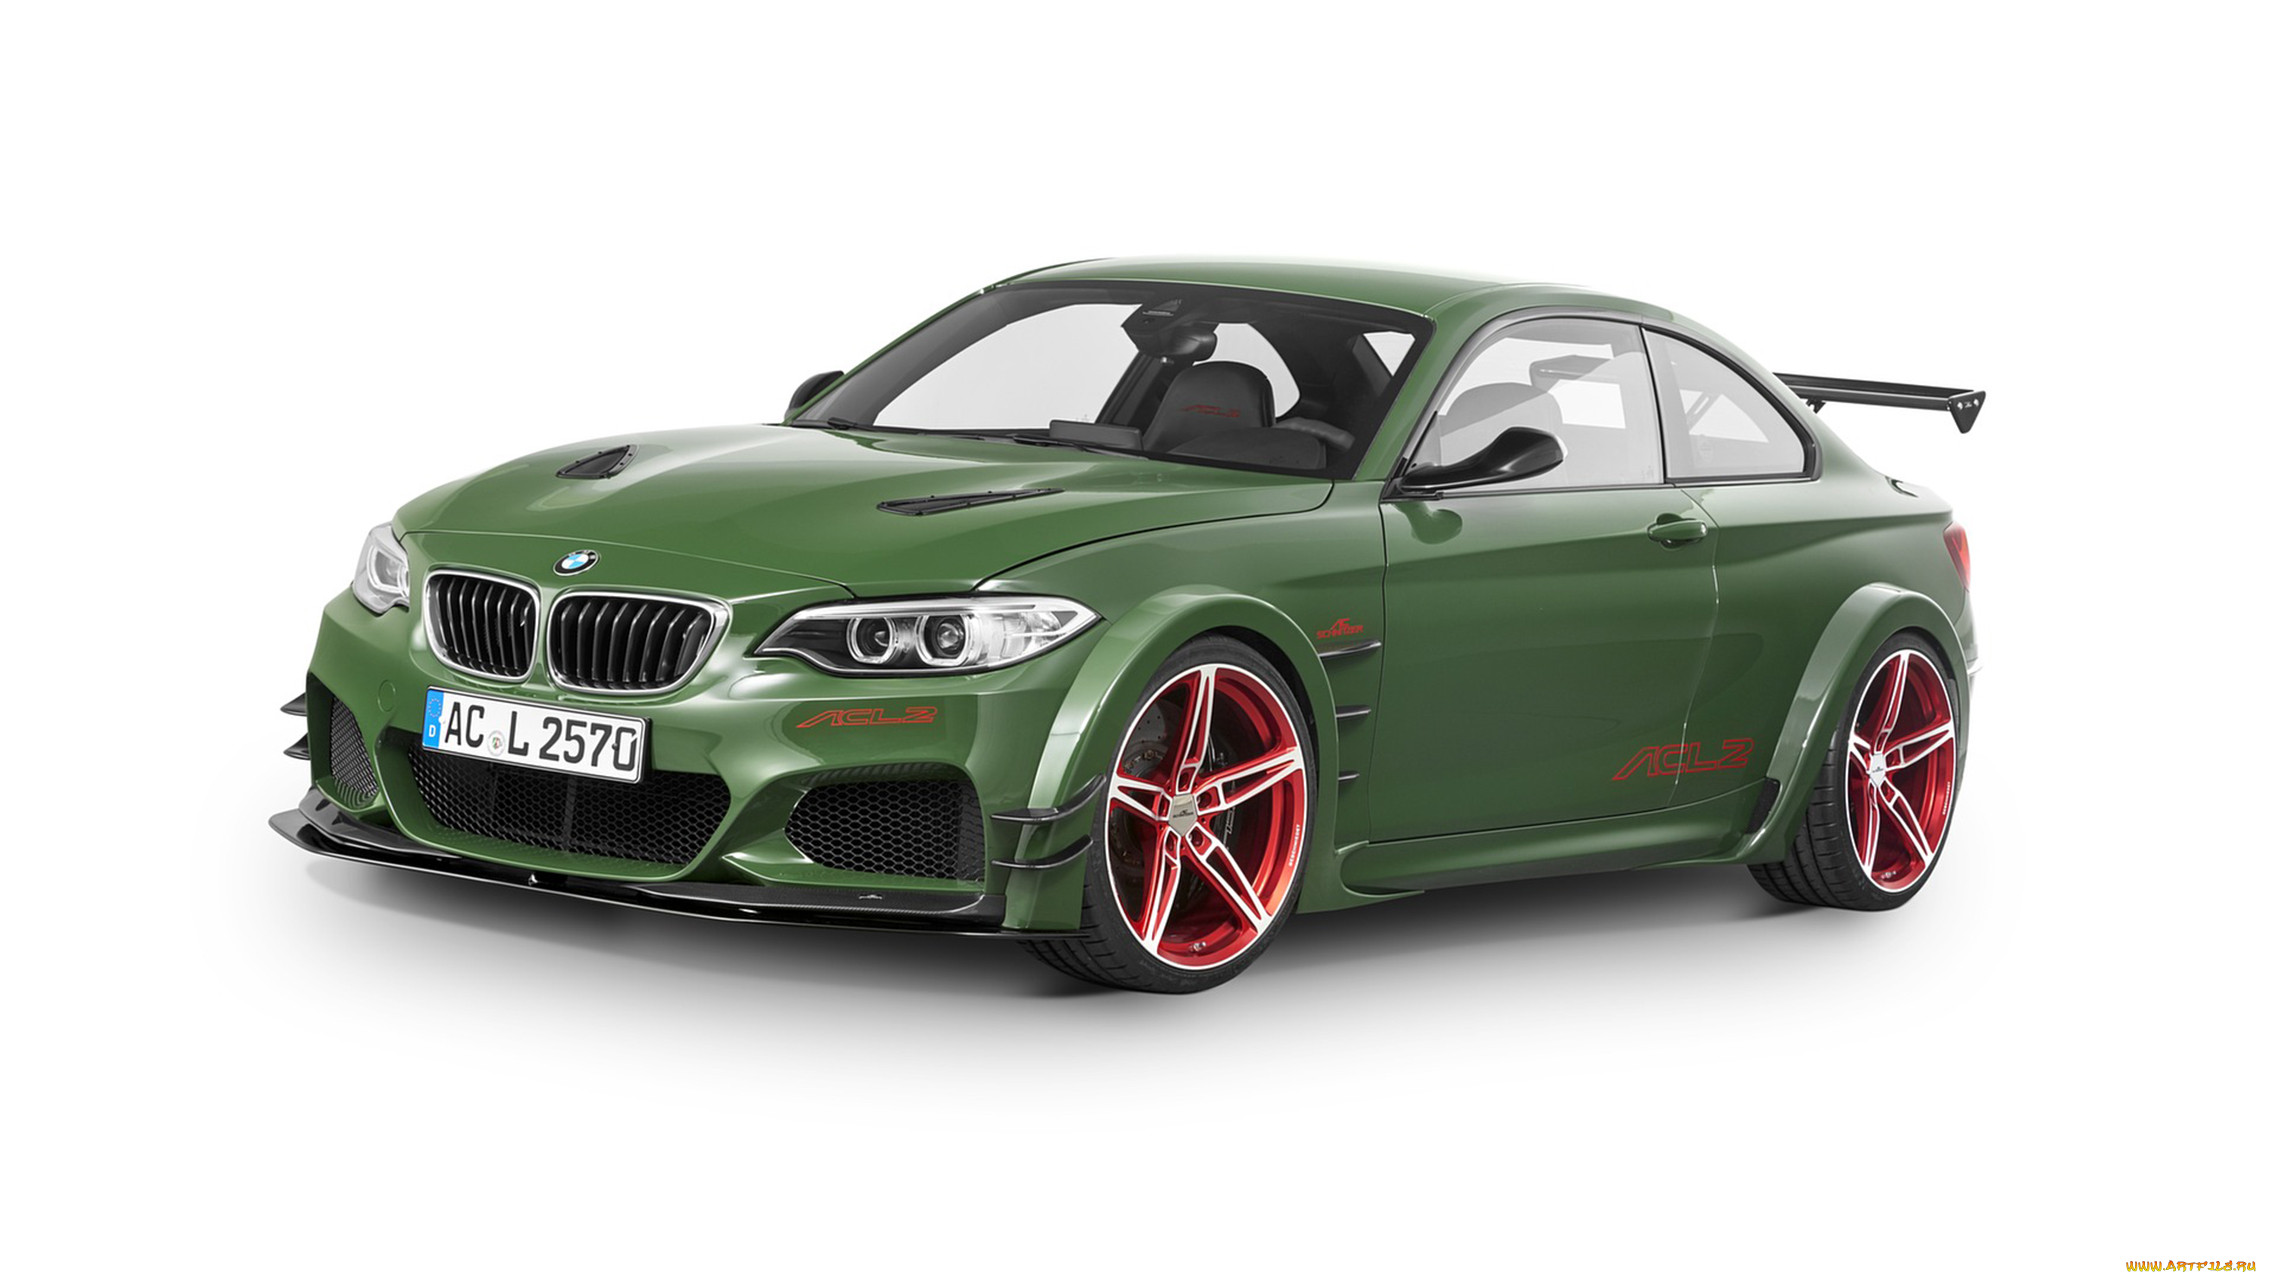 ac schnitzer acl2 concept based on the bmw m-235i coupe 2016, , bmw, based, concept, ac, schnitzer, acl2, 2016, coupe, m-235i